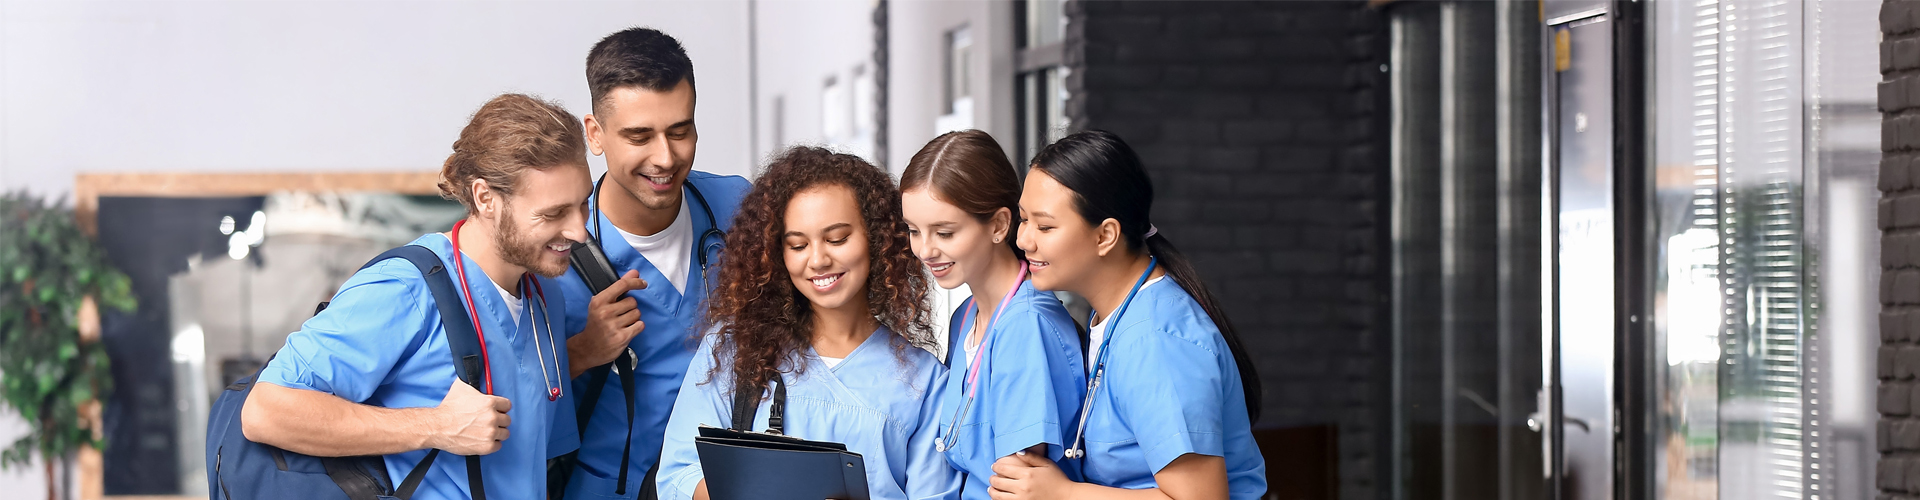 The Benefits of Earning Your BSN as an RN